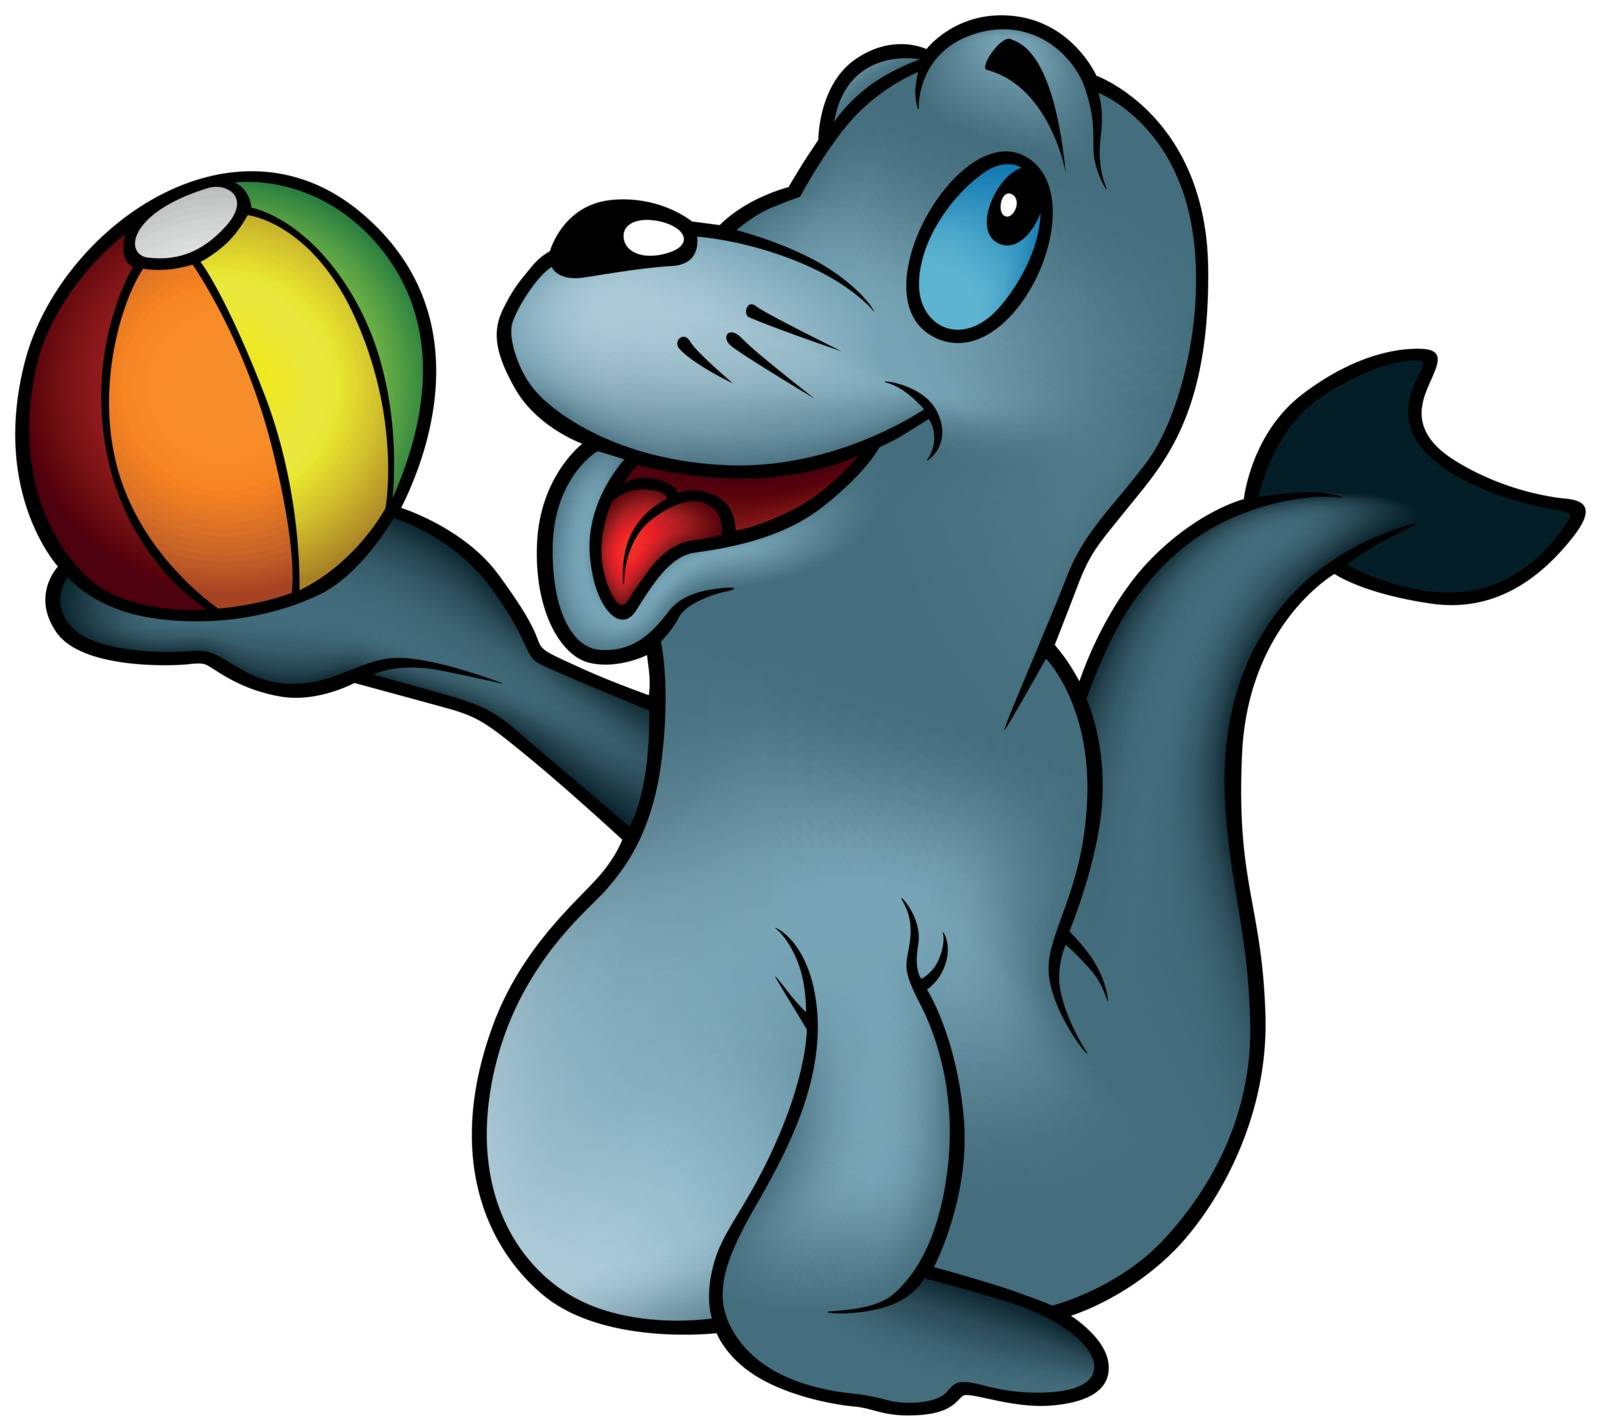 Seal playing With a Ball - Colored Cartoon Illustration, Vector